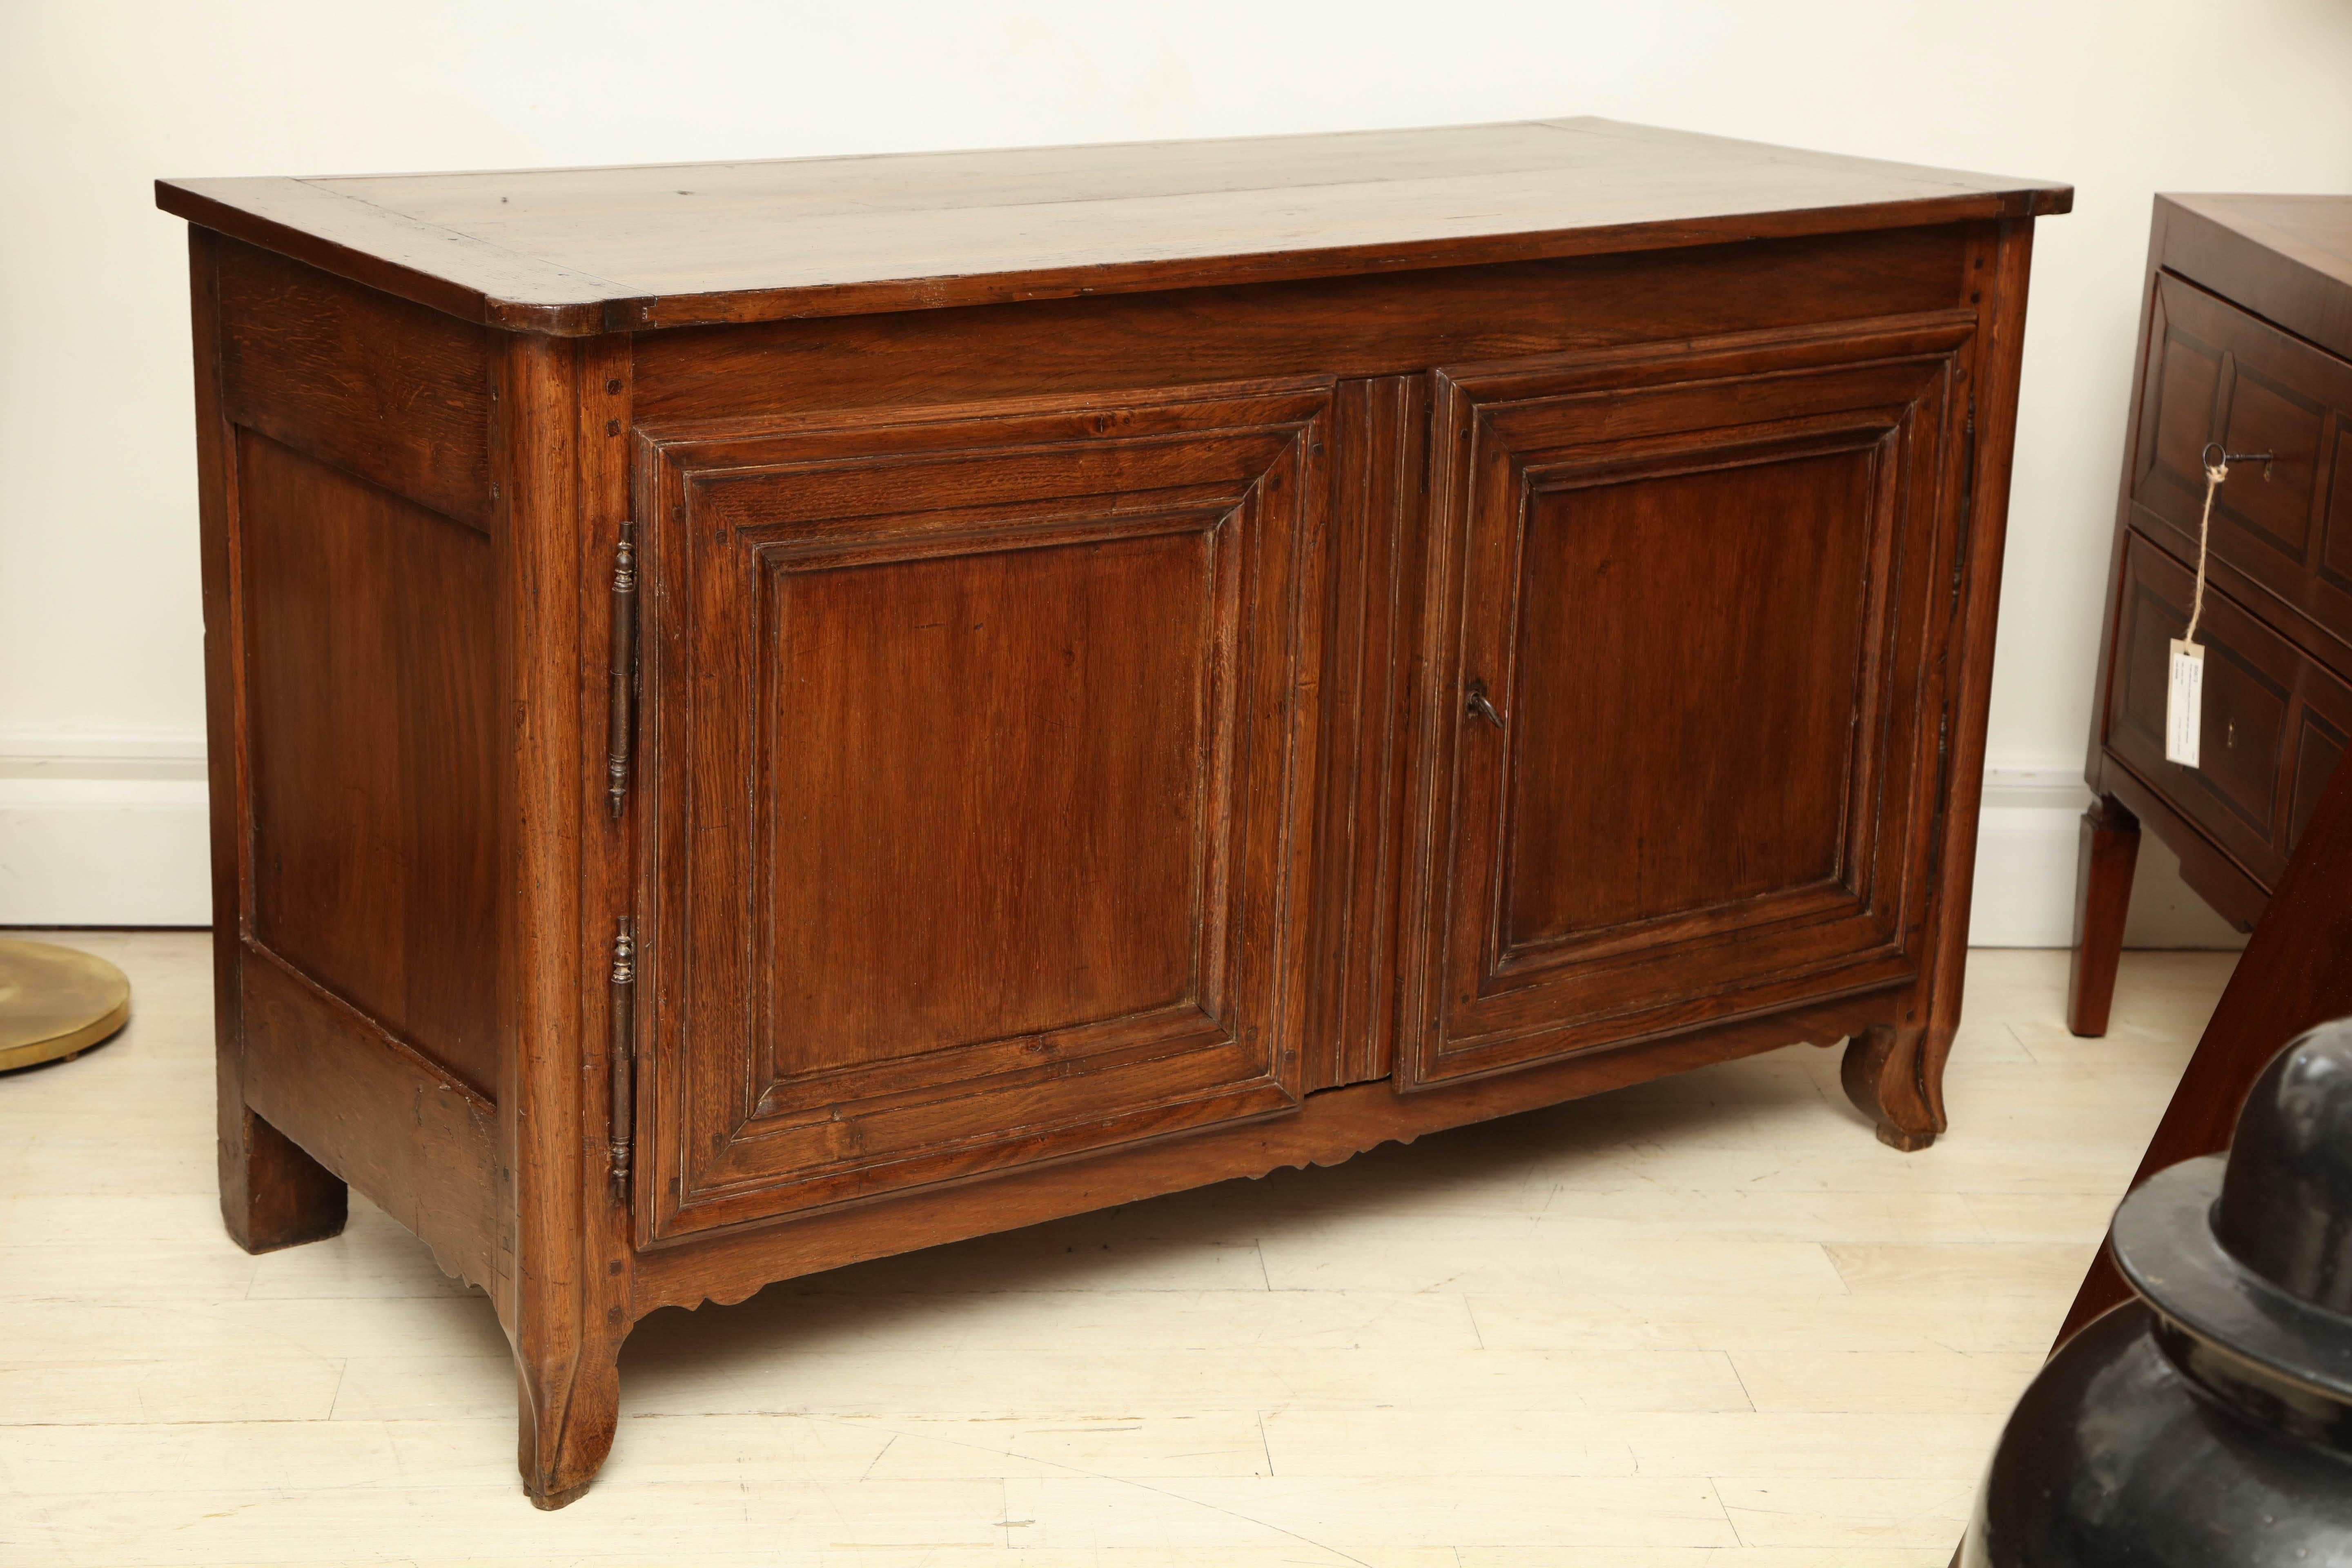 18th century French country oak sideboard with two paneled doors, curved side supports and interior shelf.